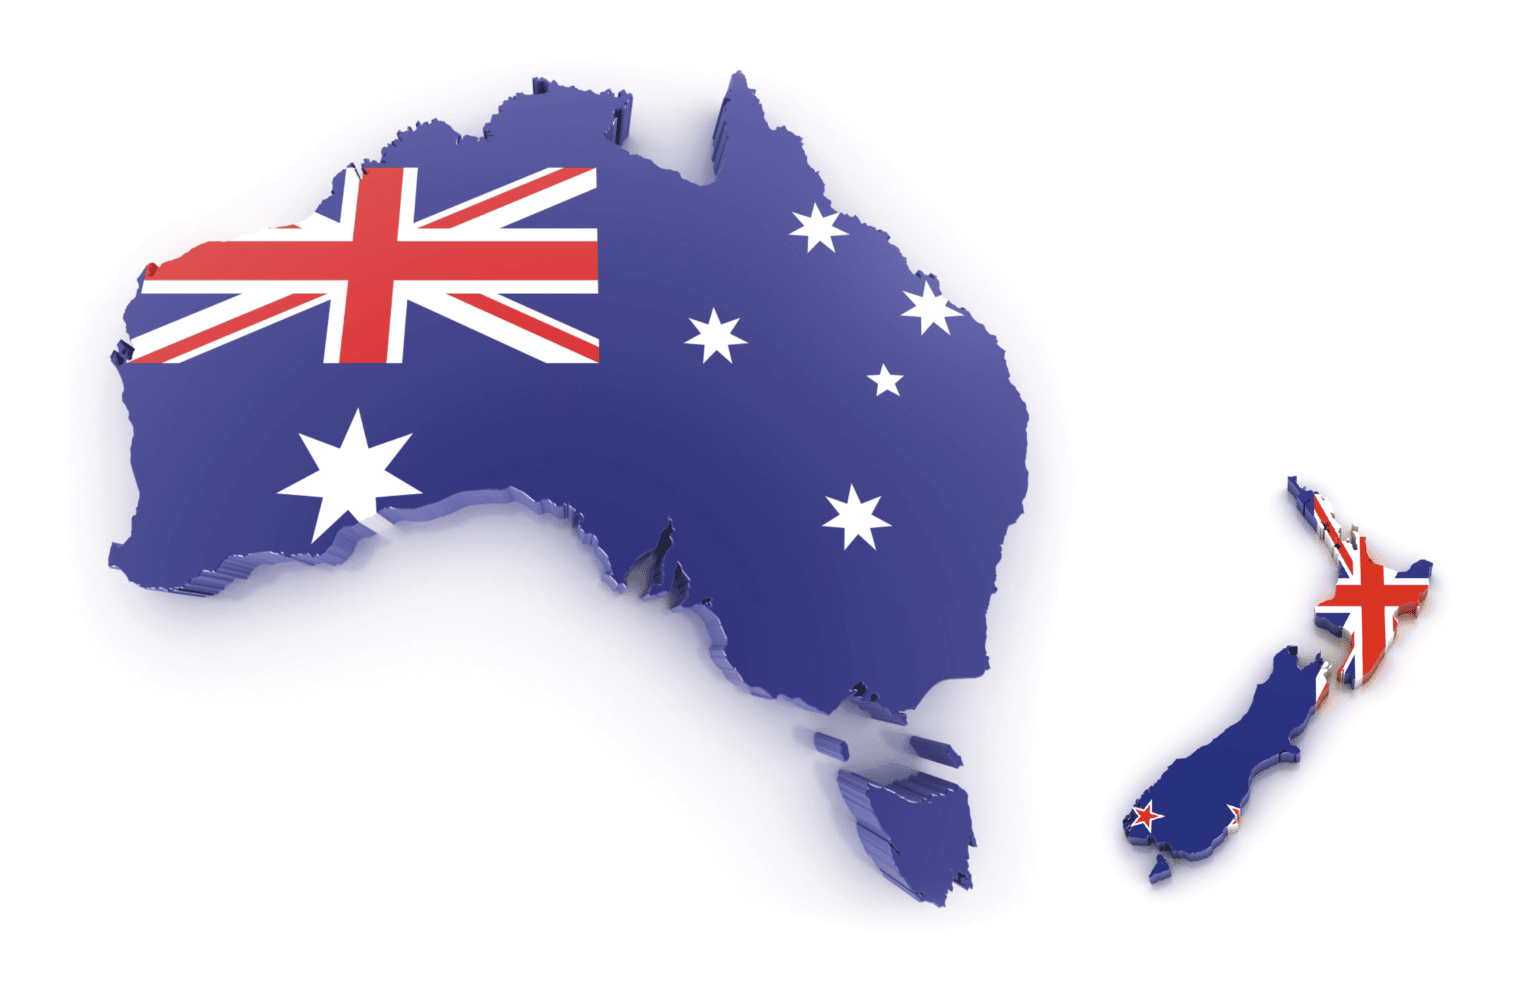 comparison of the New Zealand and Australia map and flag